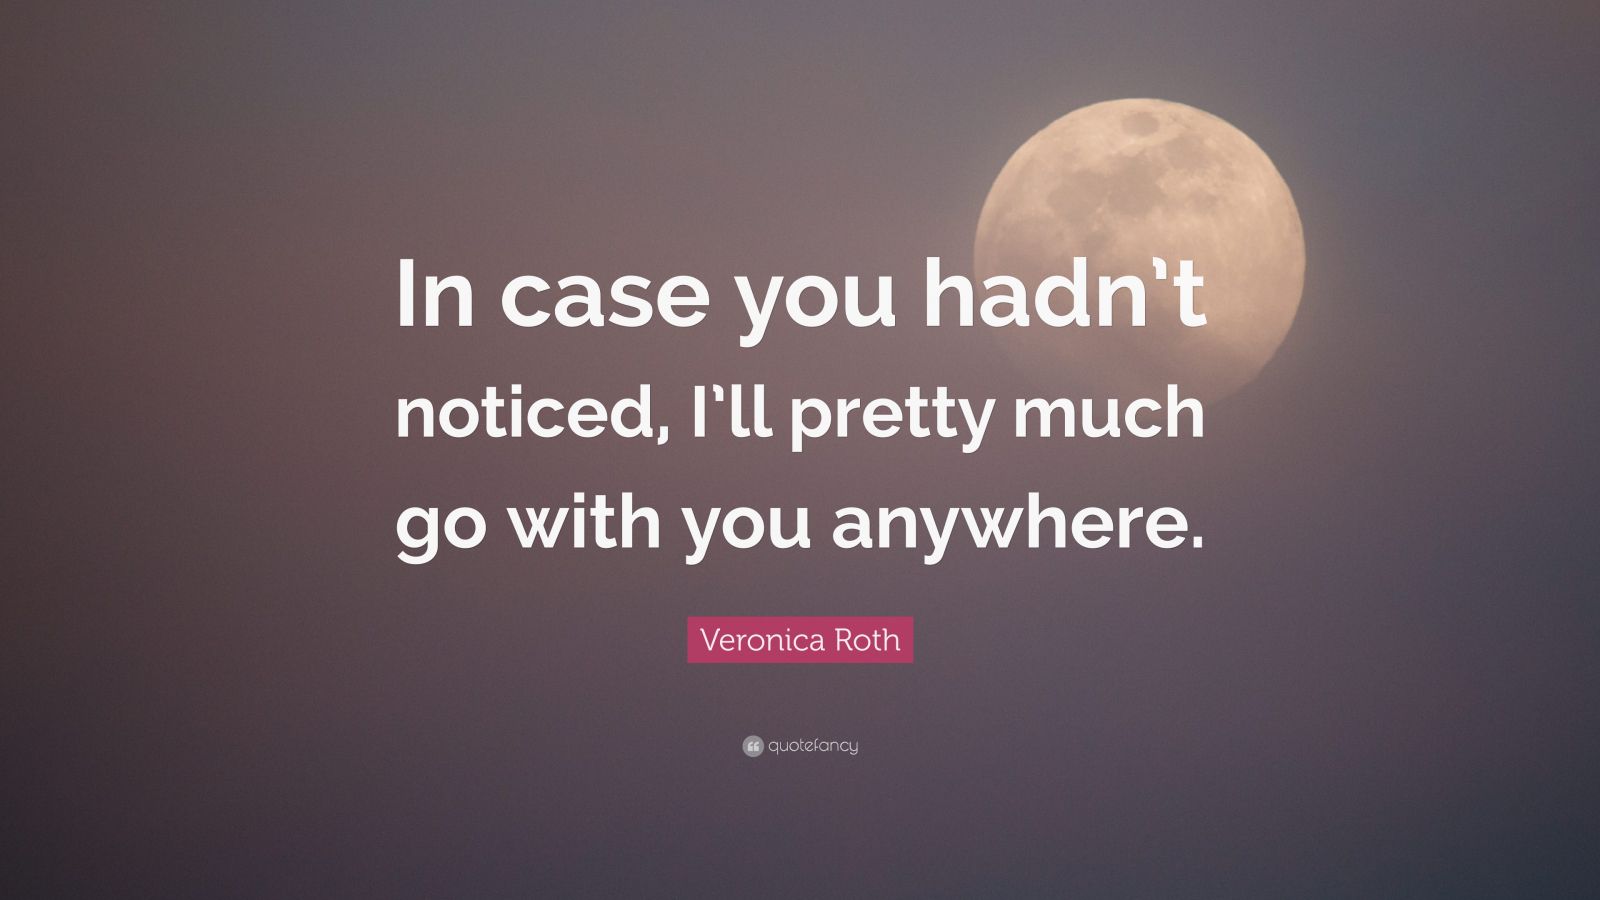 Veronica Roth Quote “in Case You Hadnt Noticed Ill Pretty Much Go With You Anywhere” 